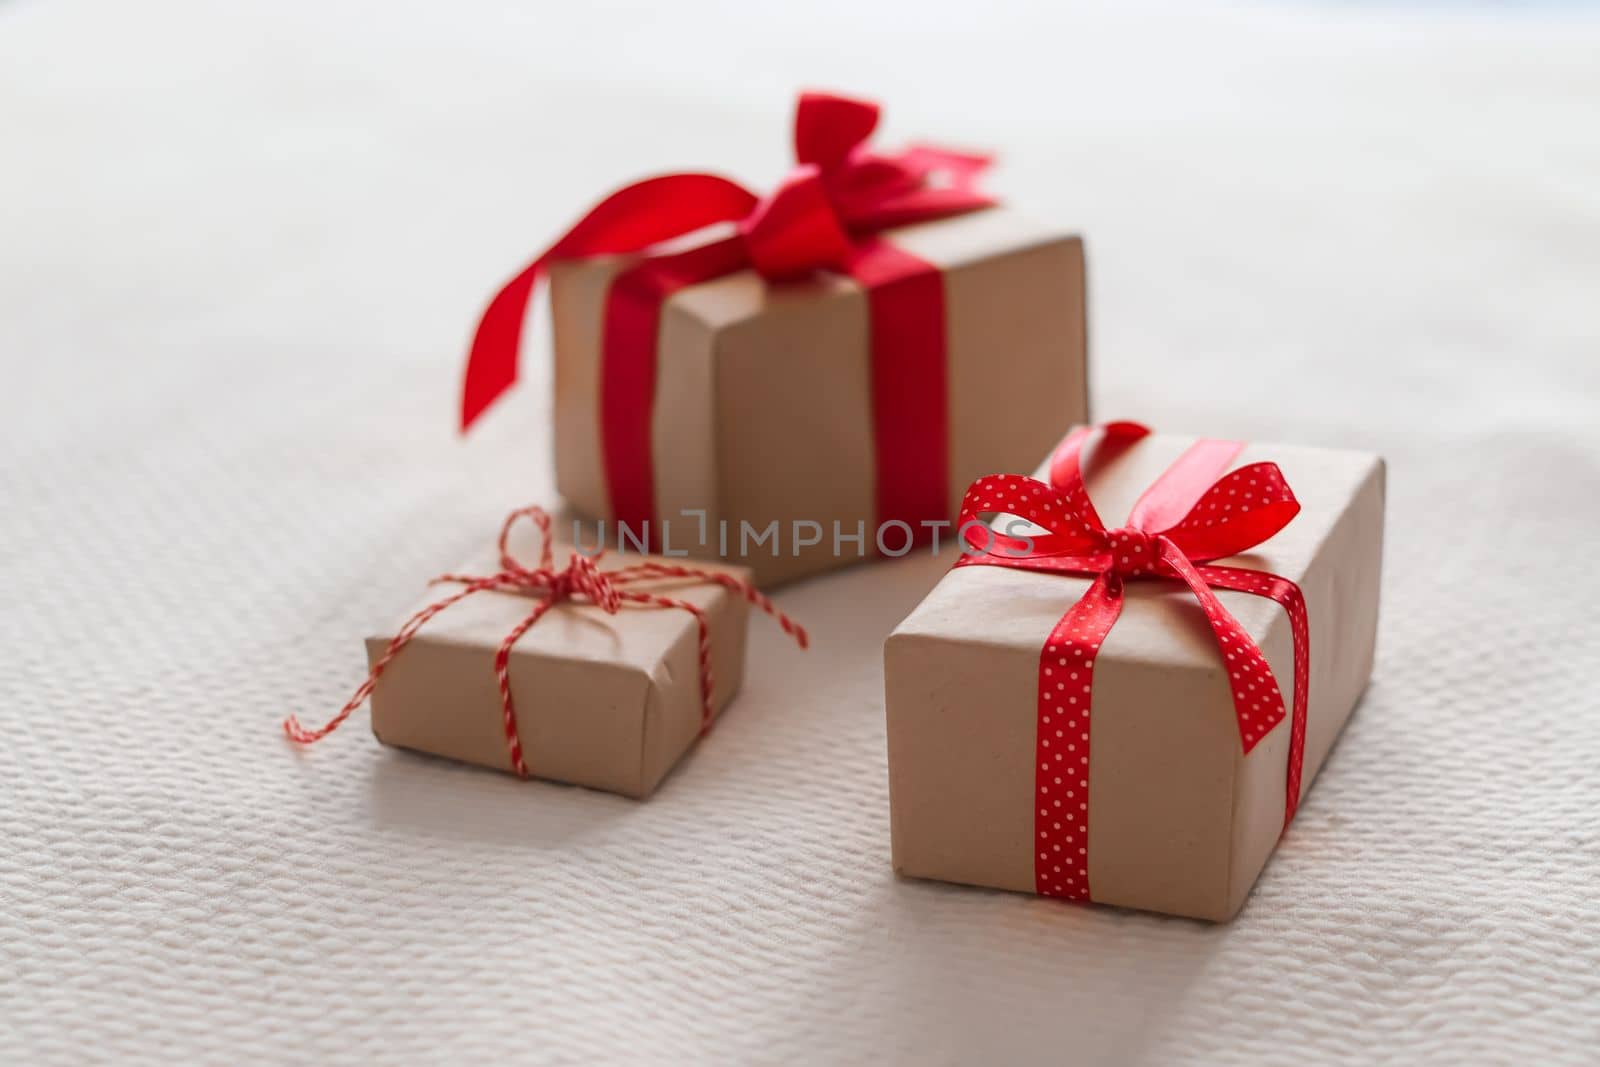 Valentines Day, birthday and holidays, gifts and presents with red ribbons.